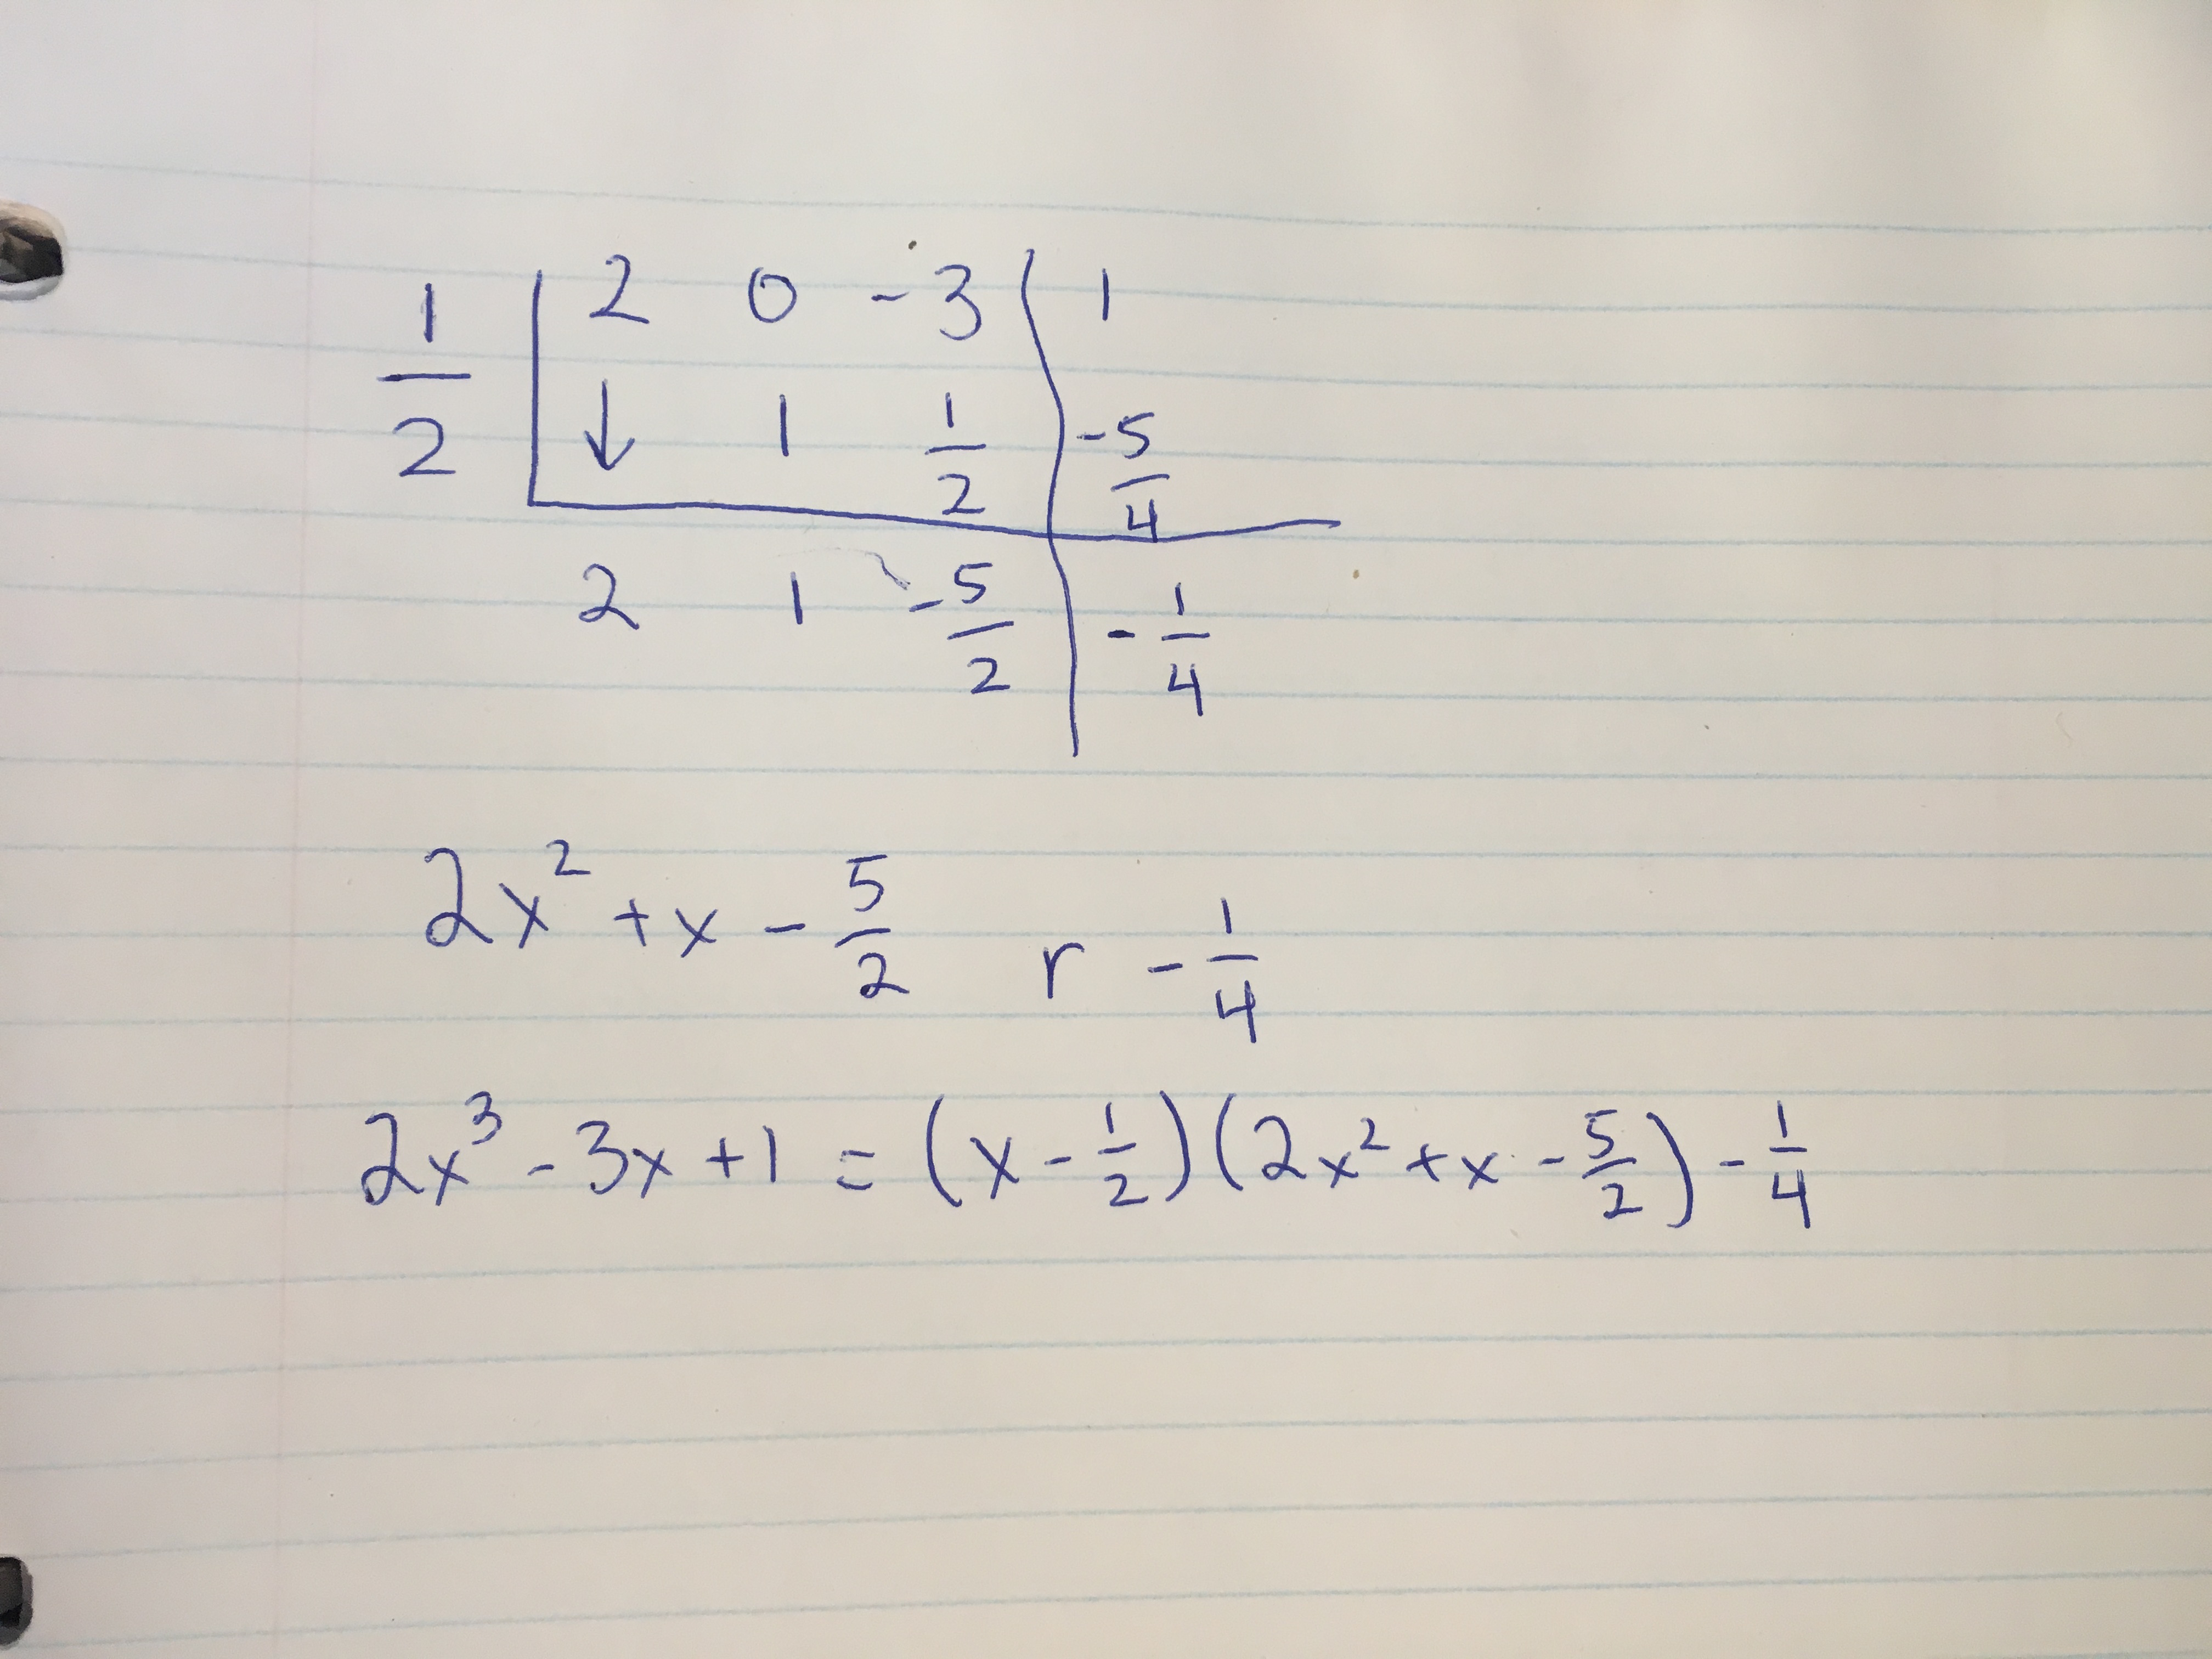 How do you use polynomial synthetic division to divide (2x^3-3x+1)div(x-1/2) and write the